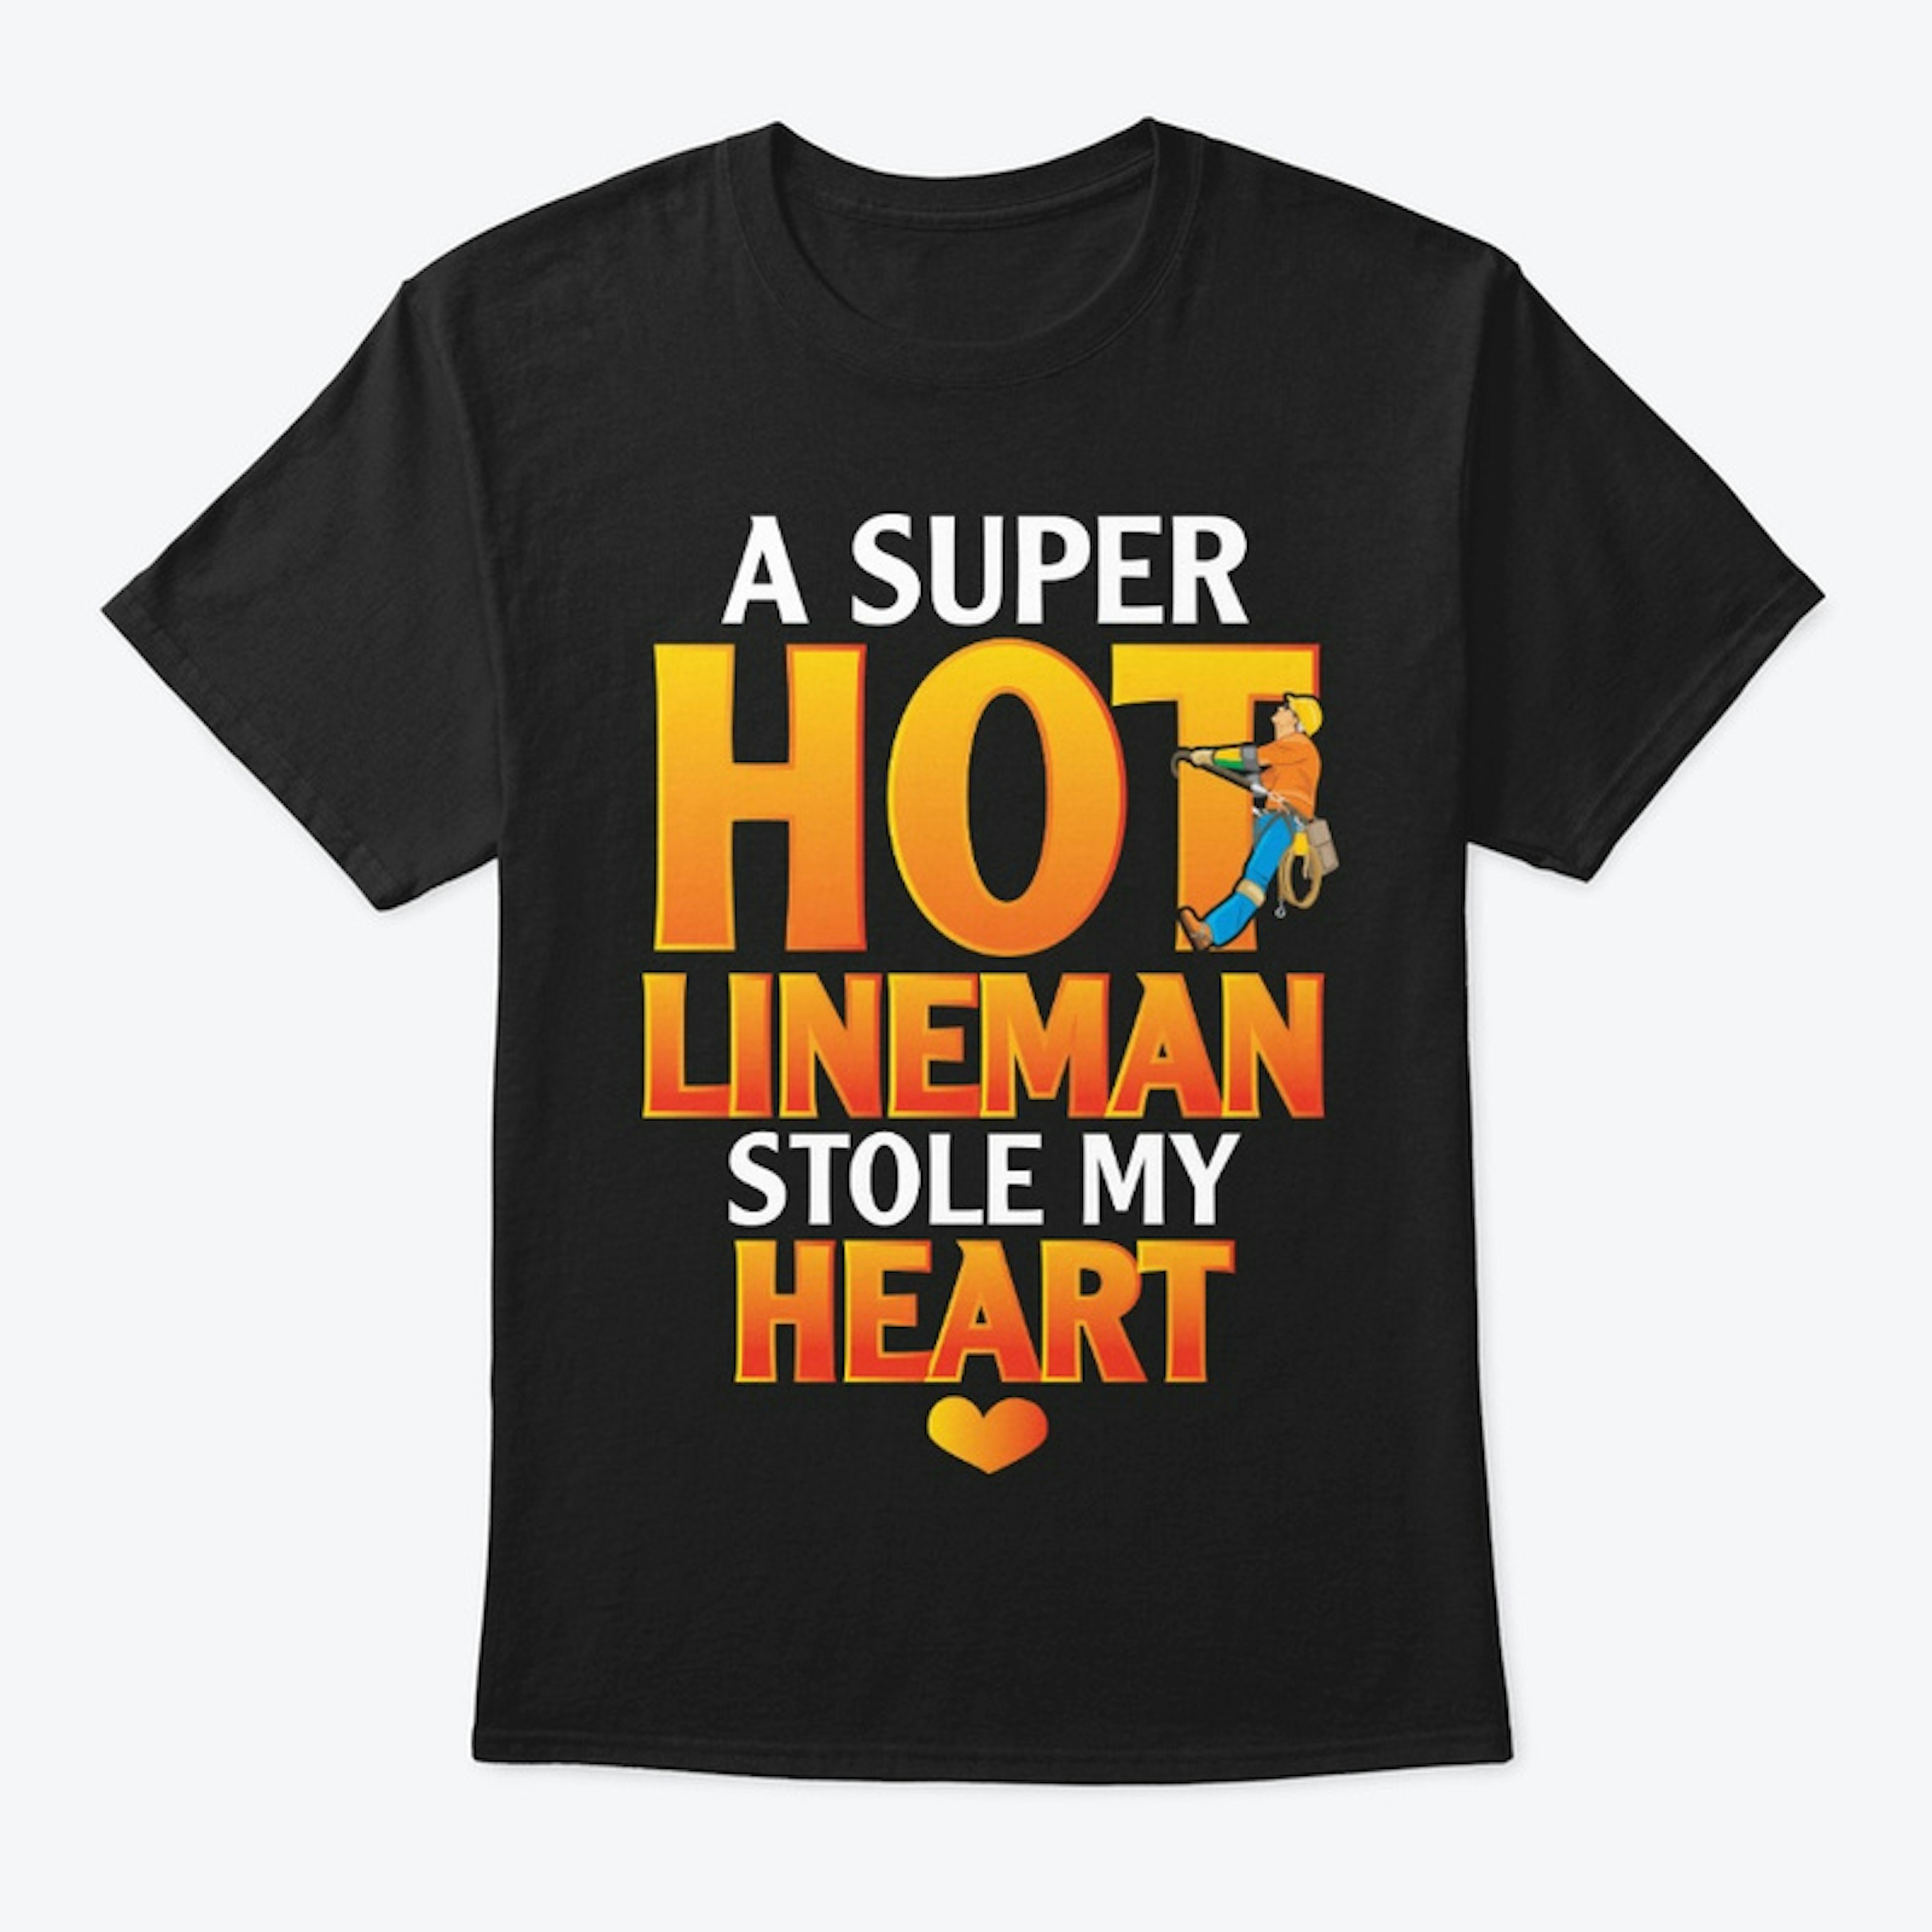 Lineman's Wife Gift - Stole My Heart